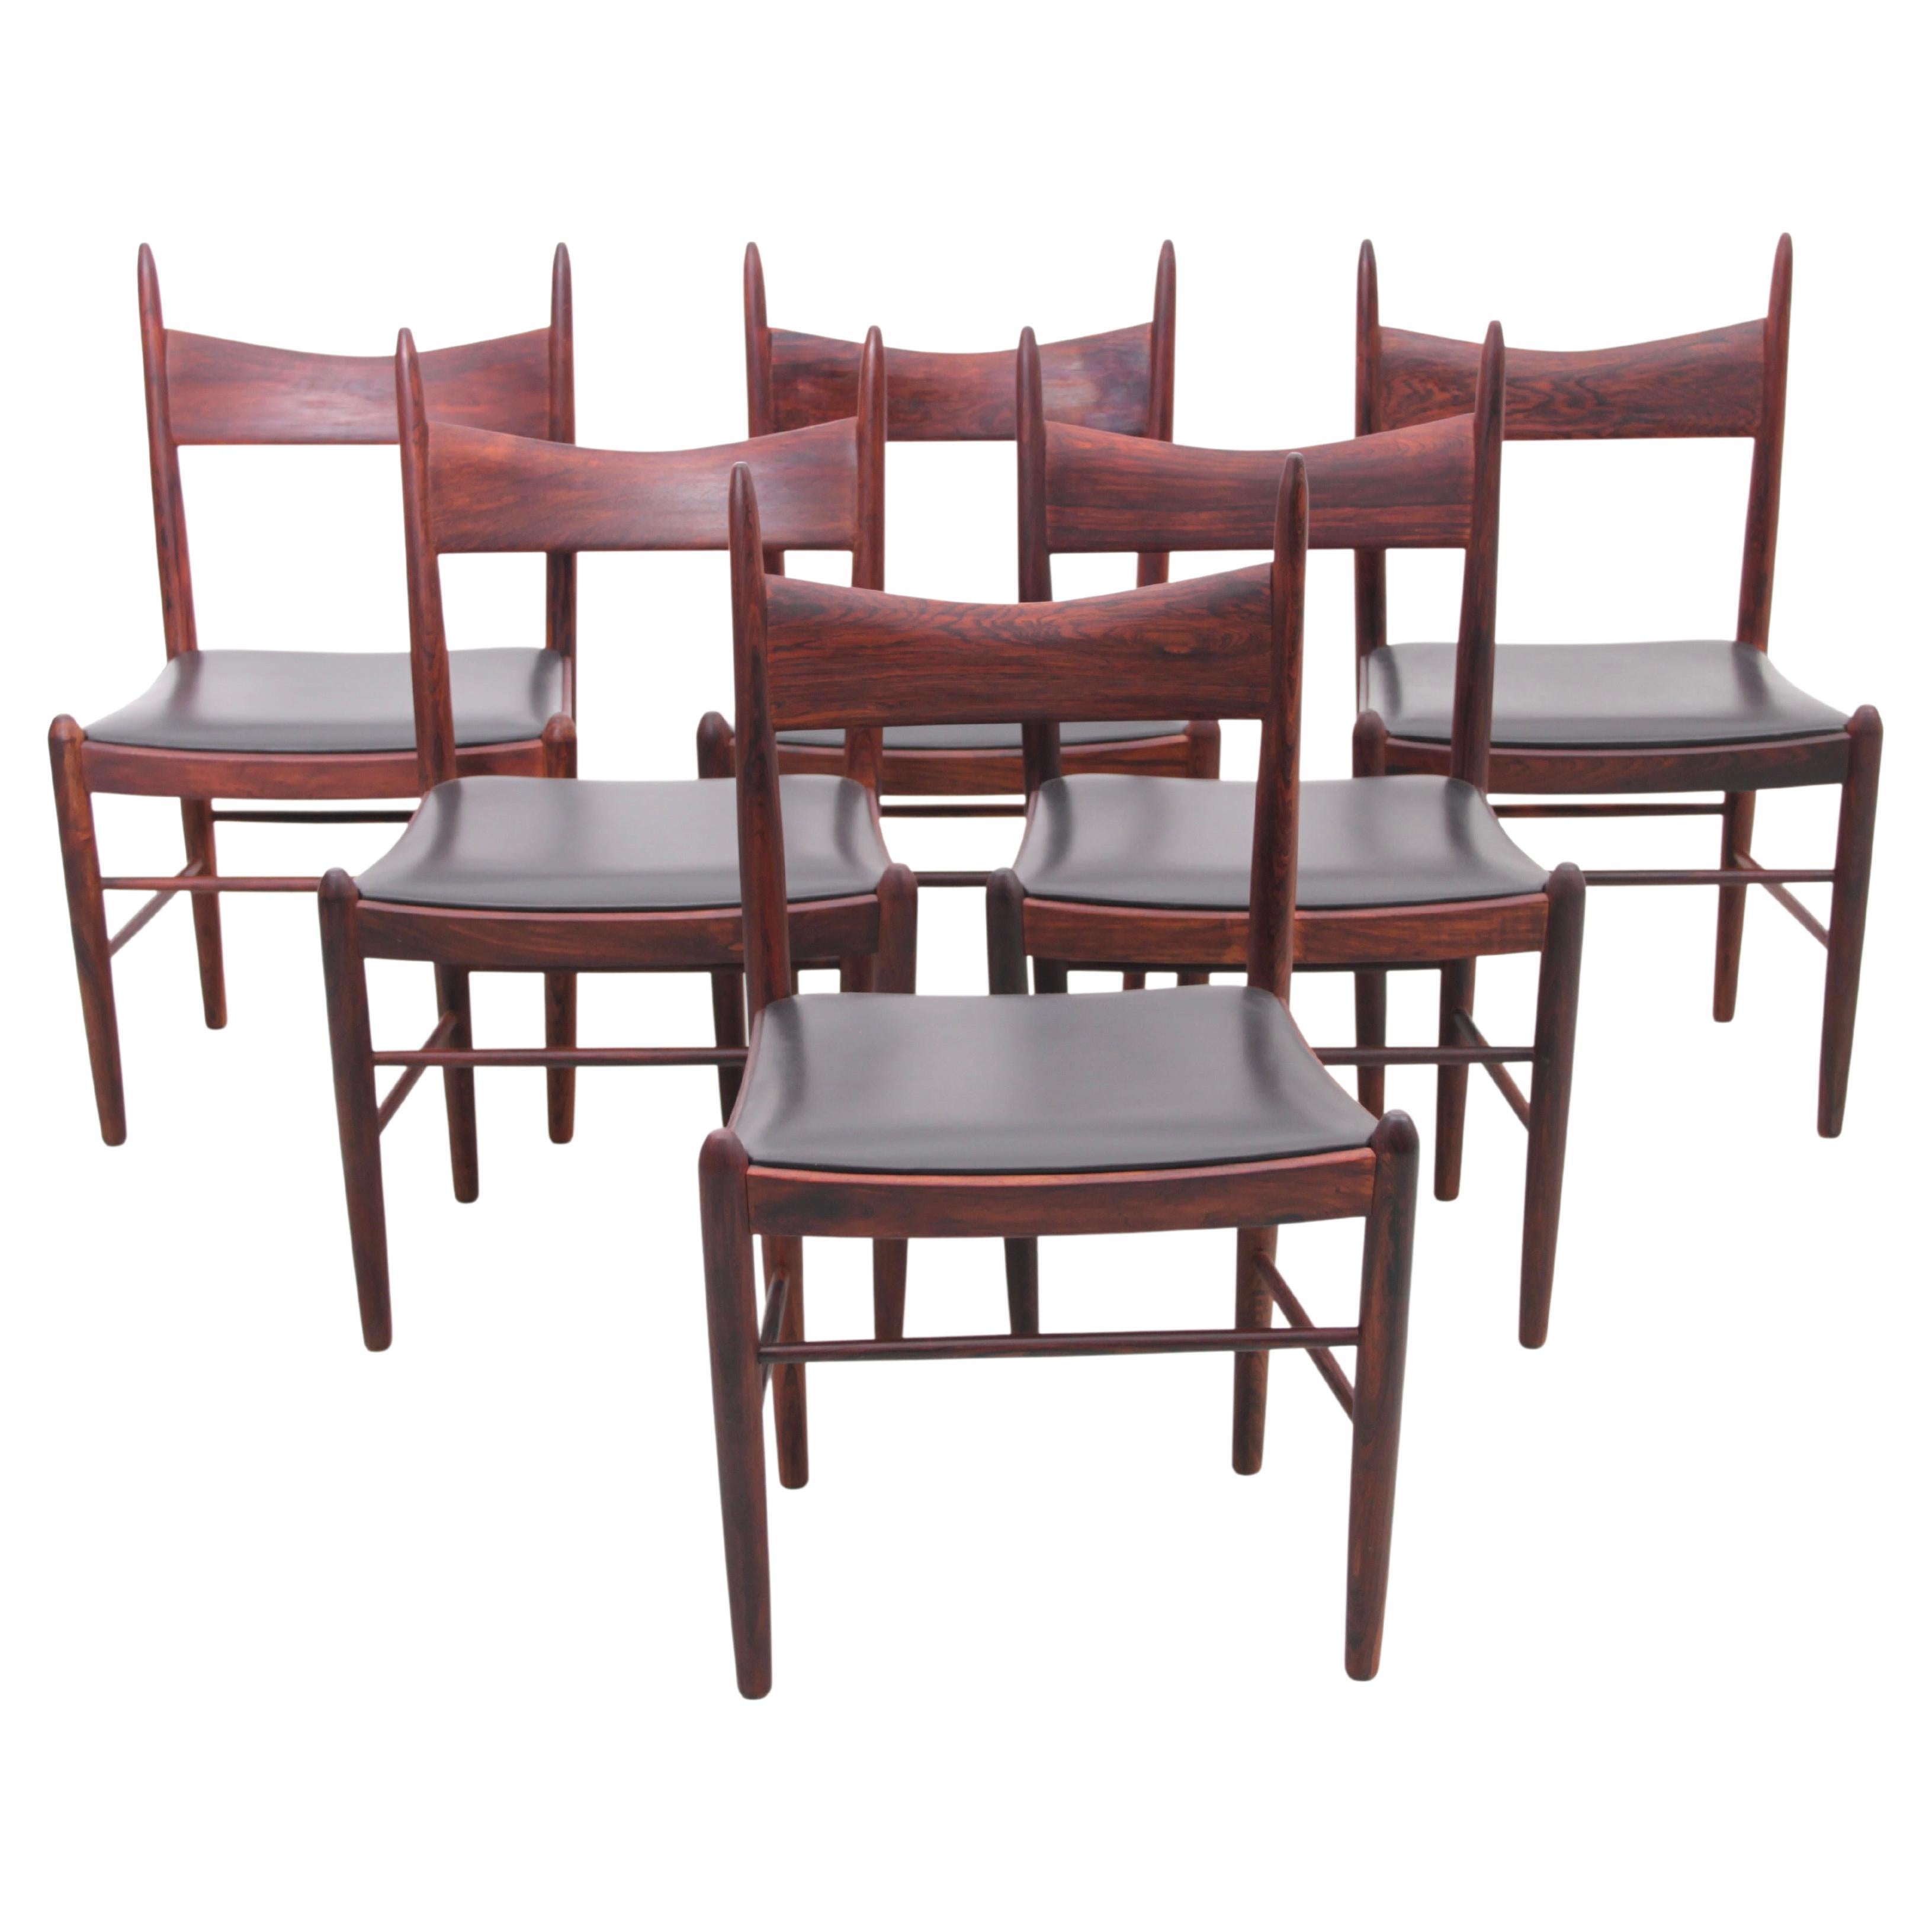 Mid-Century Modern Scandinavian Set of 6 Dining Chairs in Rosewood